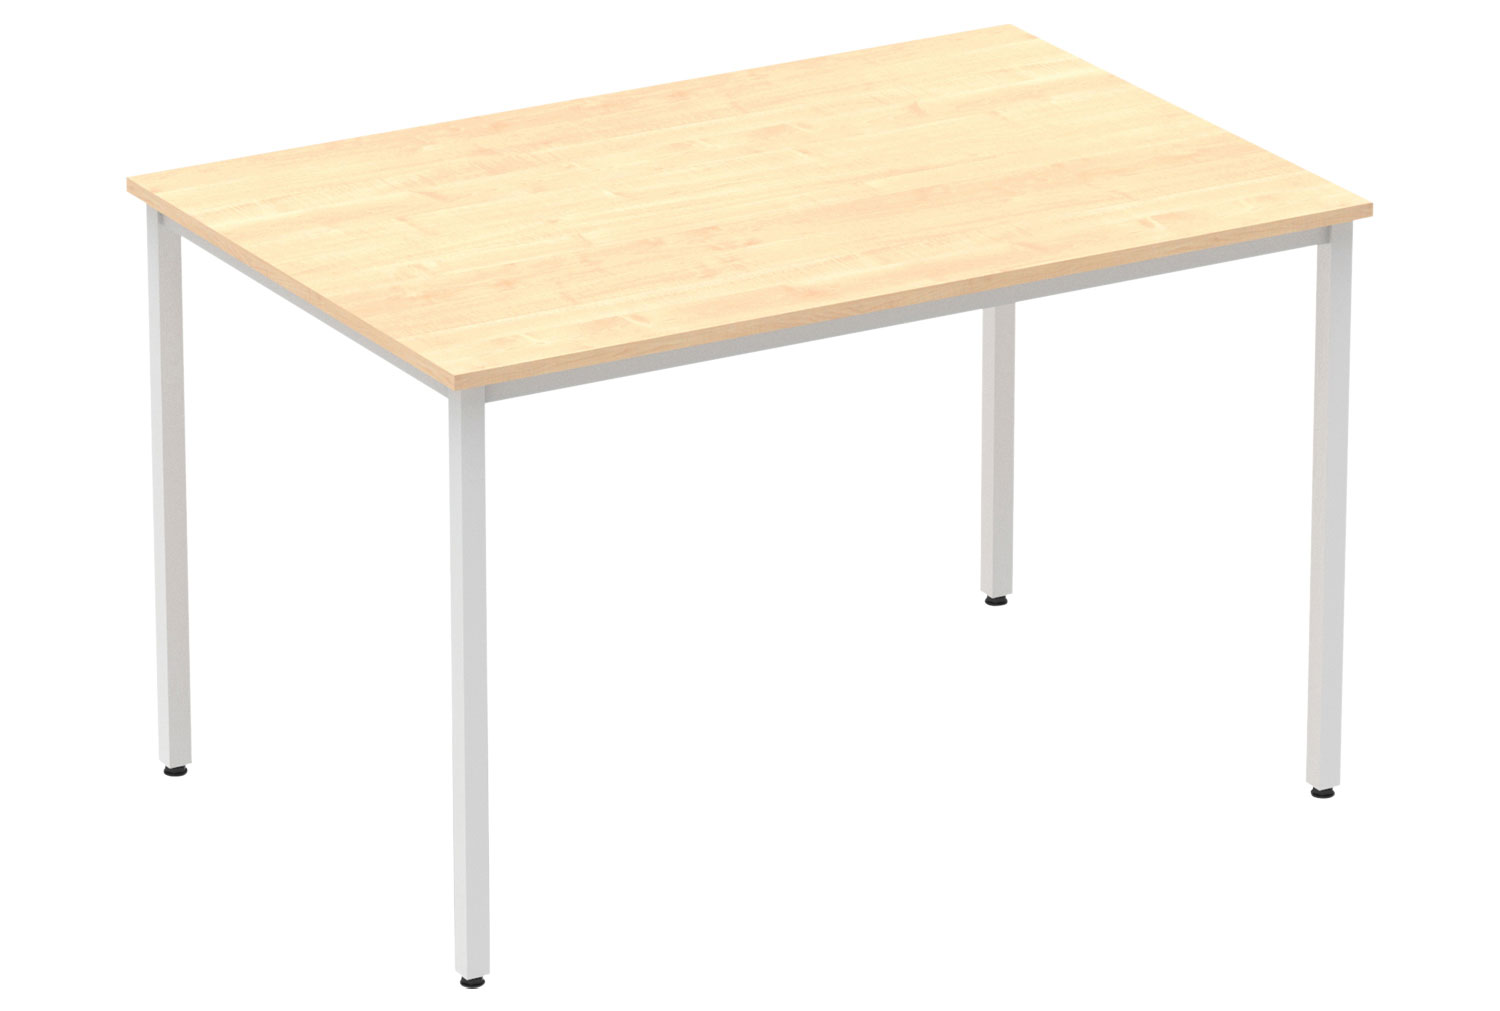 All Maple Rectangular Meeting Table (Square Legs), 120wx80dx73h (cm)